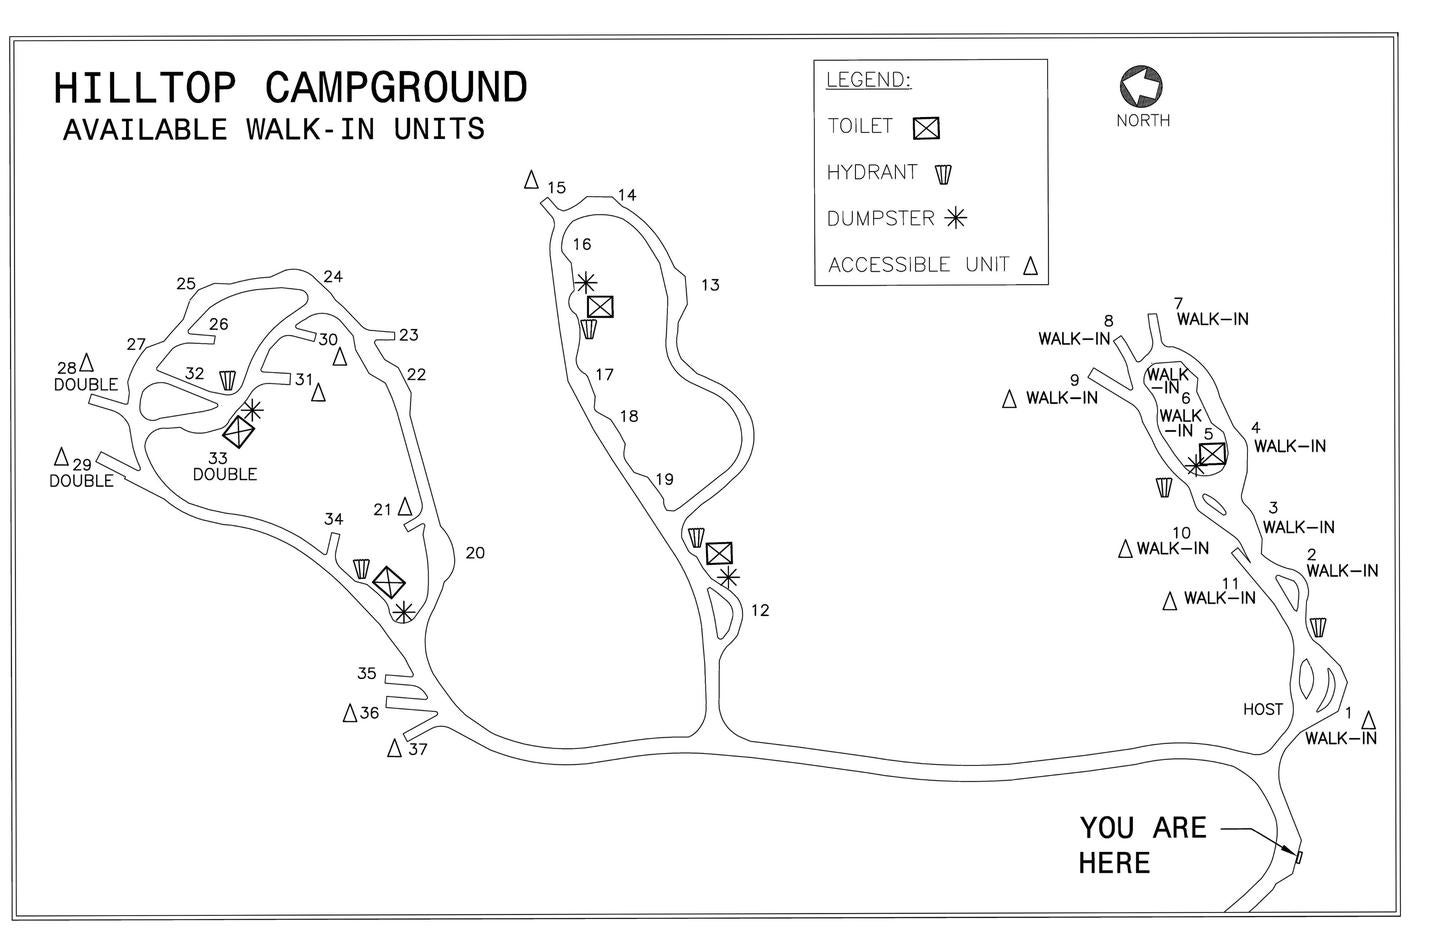 Hilltop Campground map showing accessible sites,walk-in units, dumpsters, toilets and hydrant locations.



Hilltop Campground Walk-in and accessible unit map

Credit:  US Forest Service